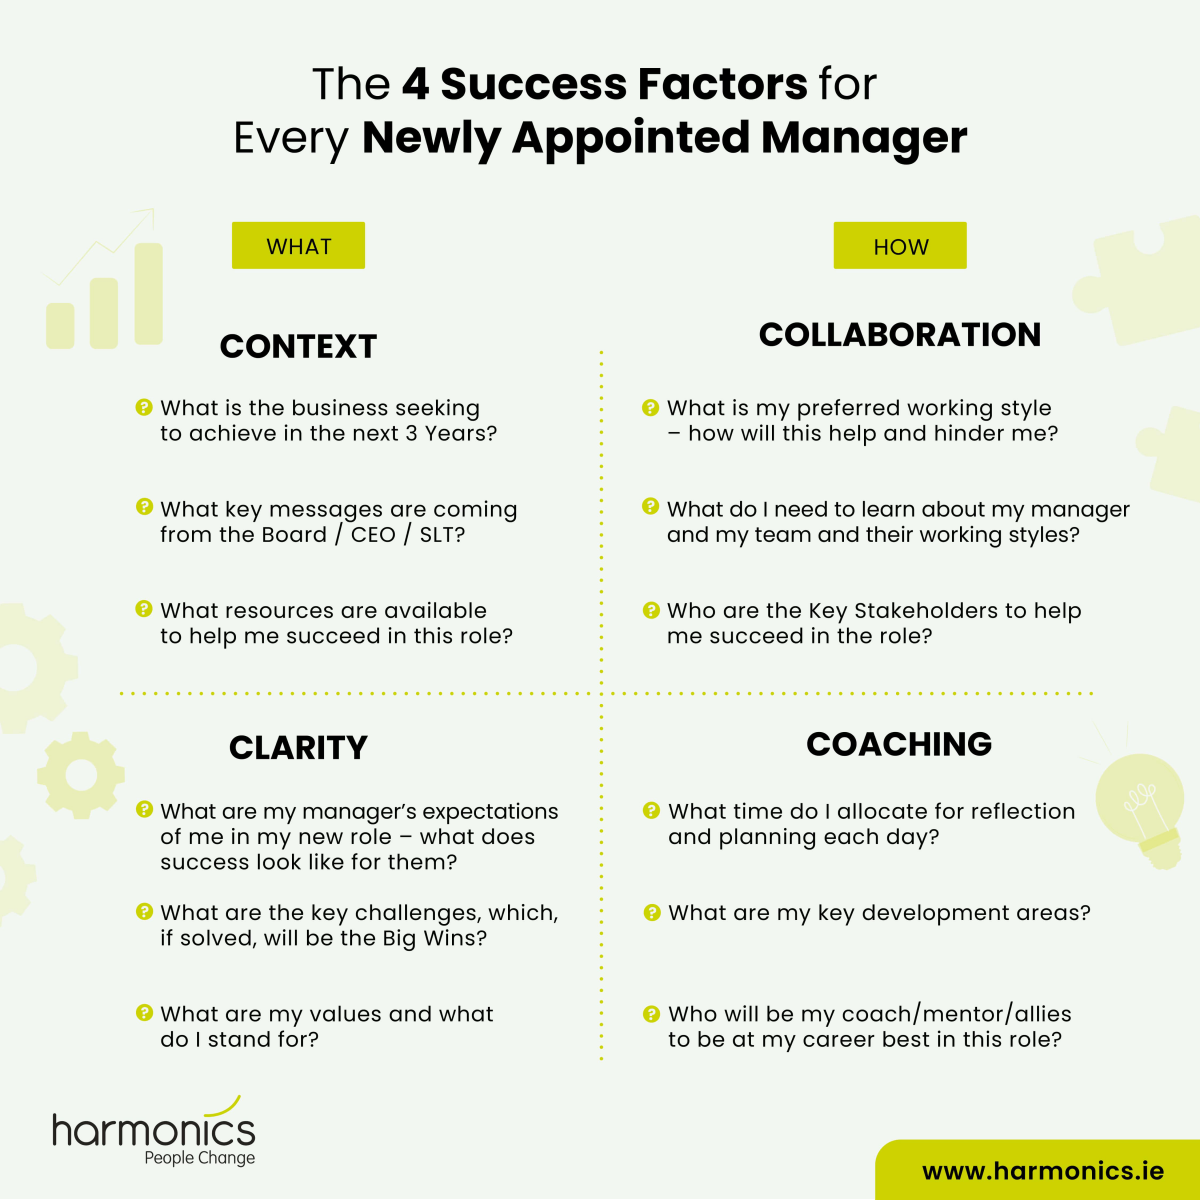 The 4 Success Factors for Every Newly Appointed Manager